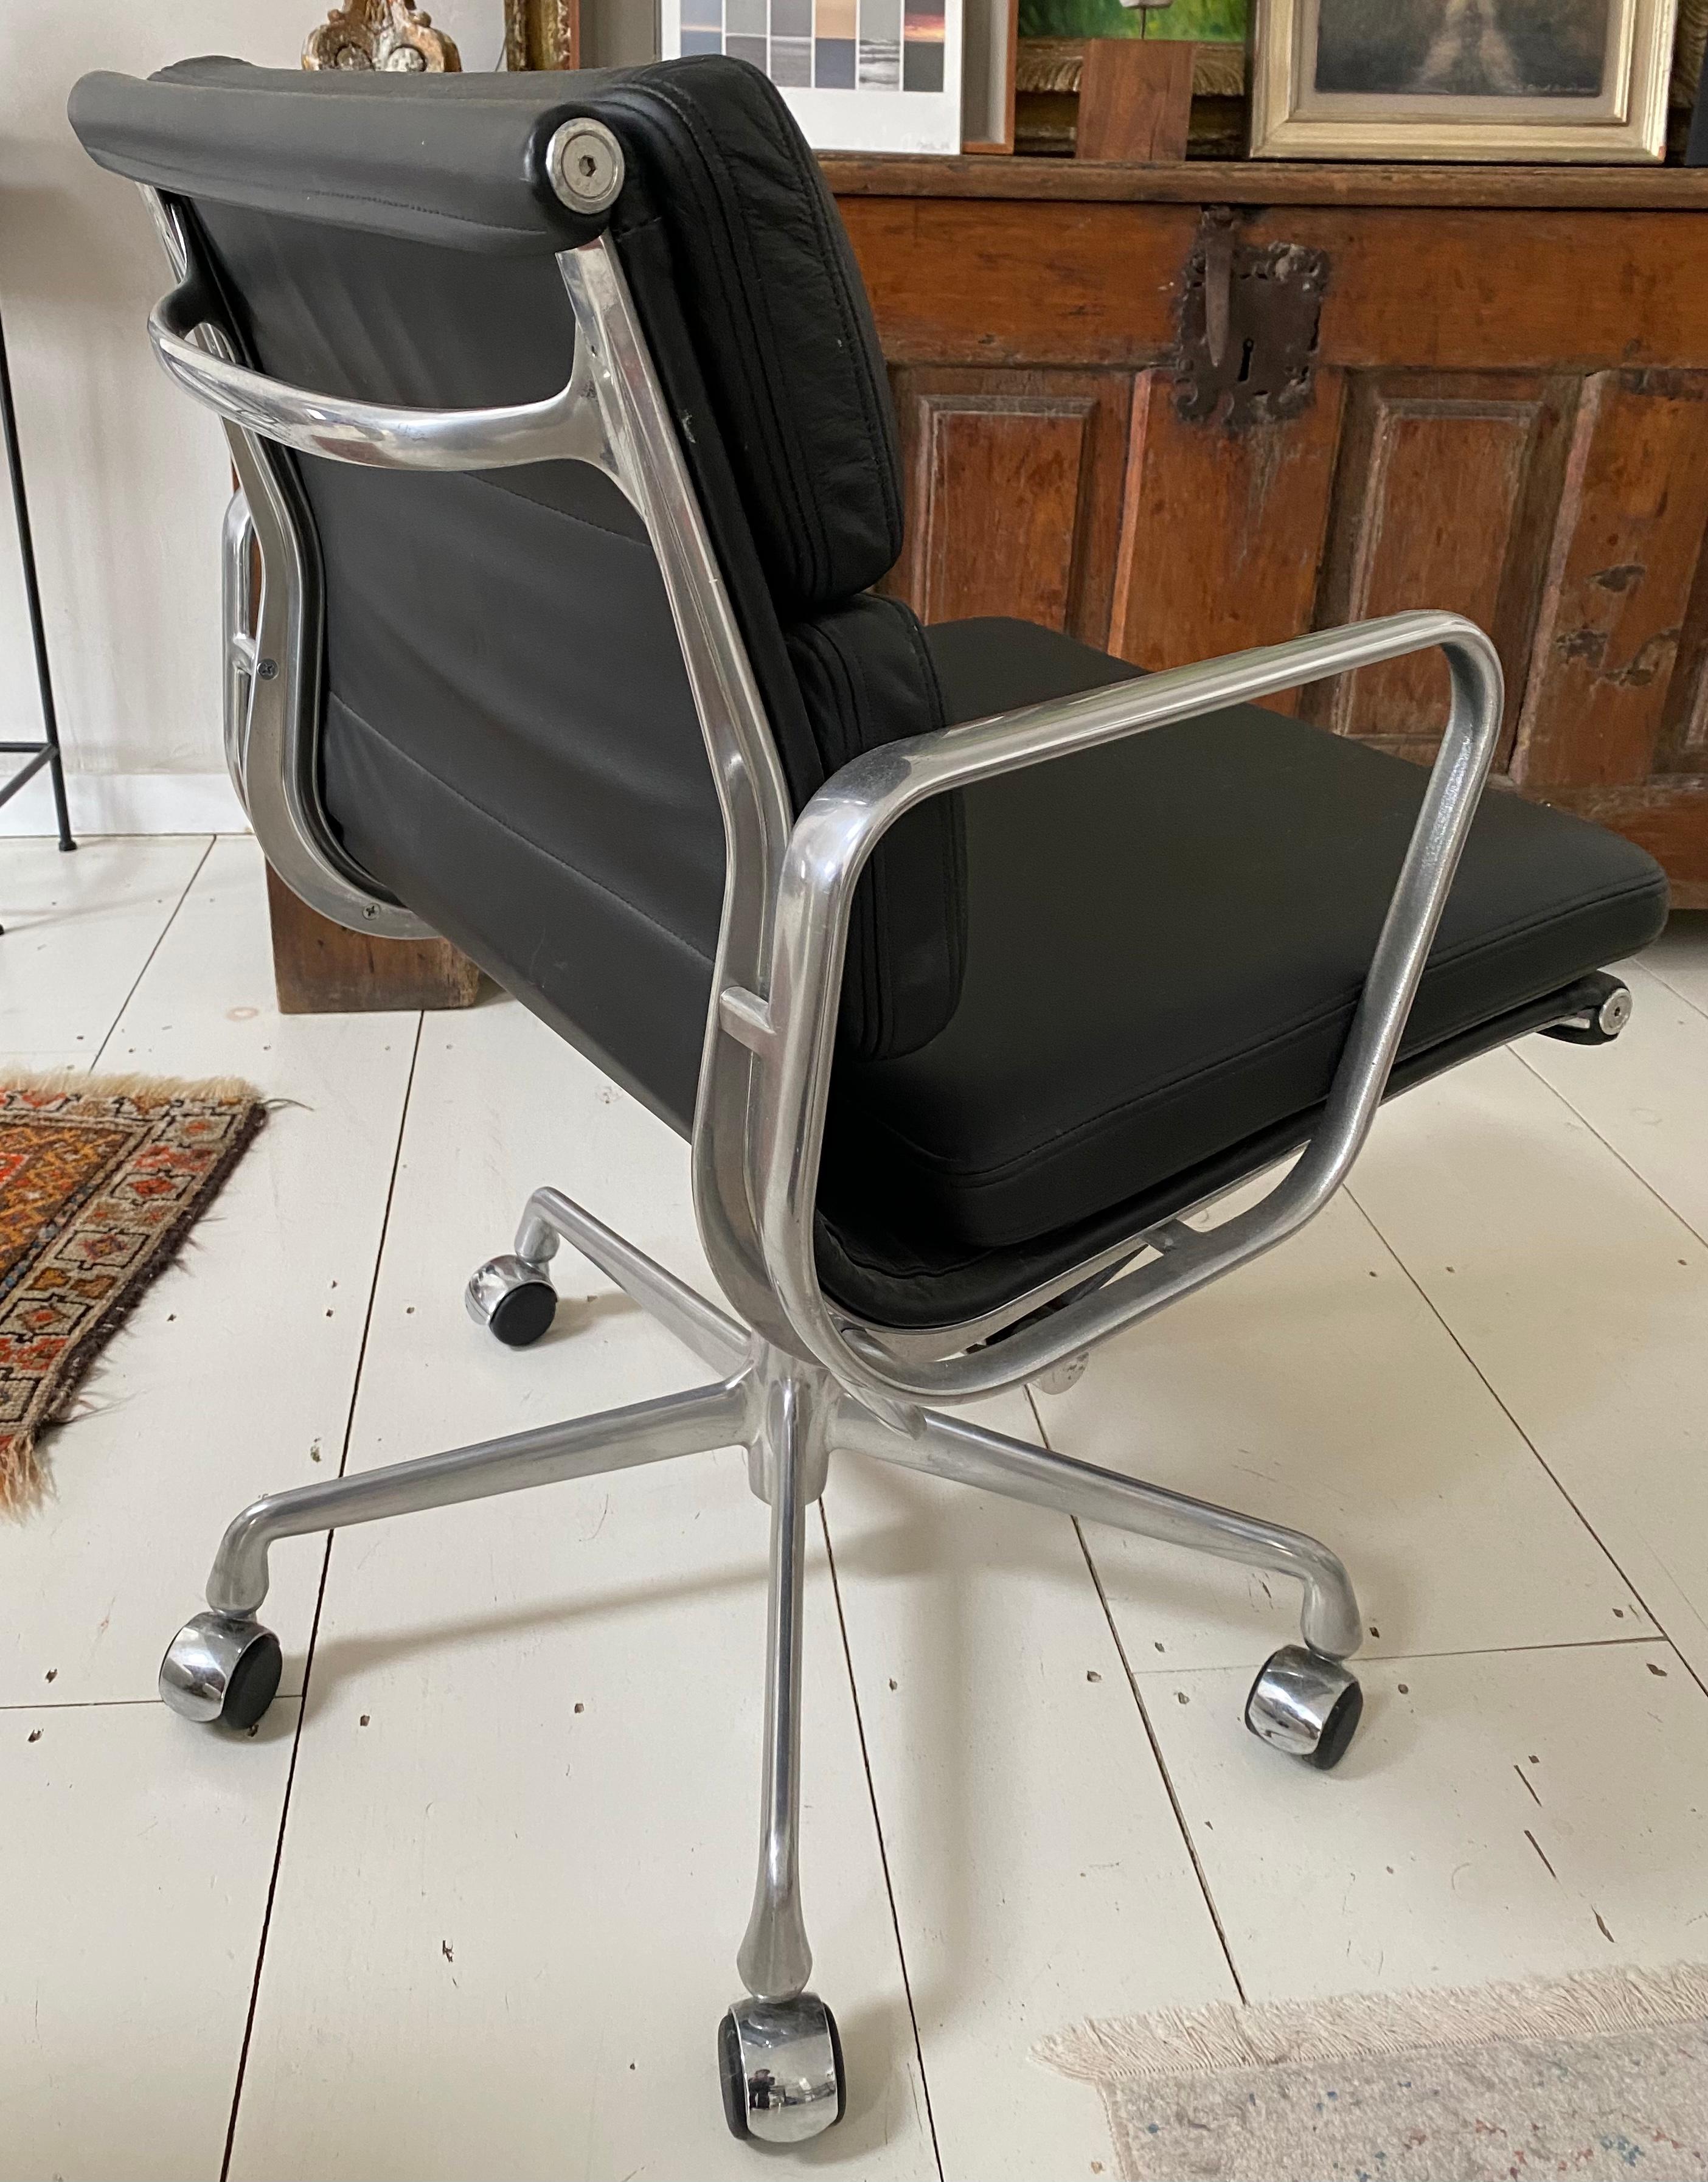 The model EA 435 is the collectible and sought after leather EAMES soft pad management desk chair from the Aluminum Group line, designed by Charles and Ray Eames for Herman Miller. This chair has soft padded black leather upholstery over five-star